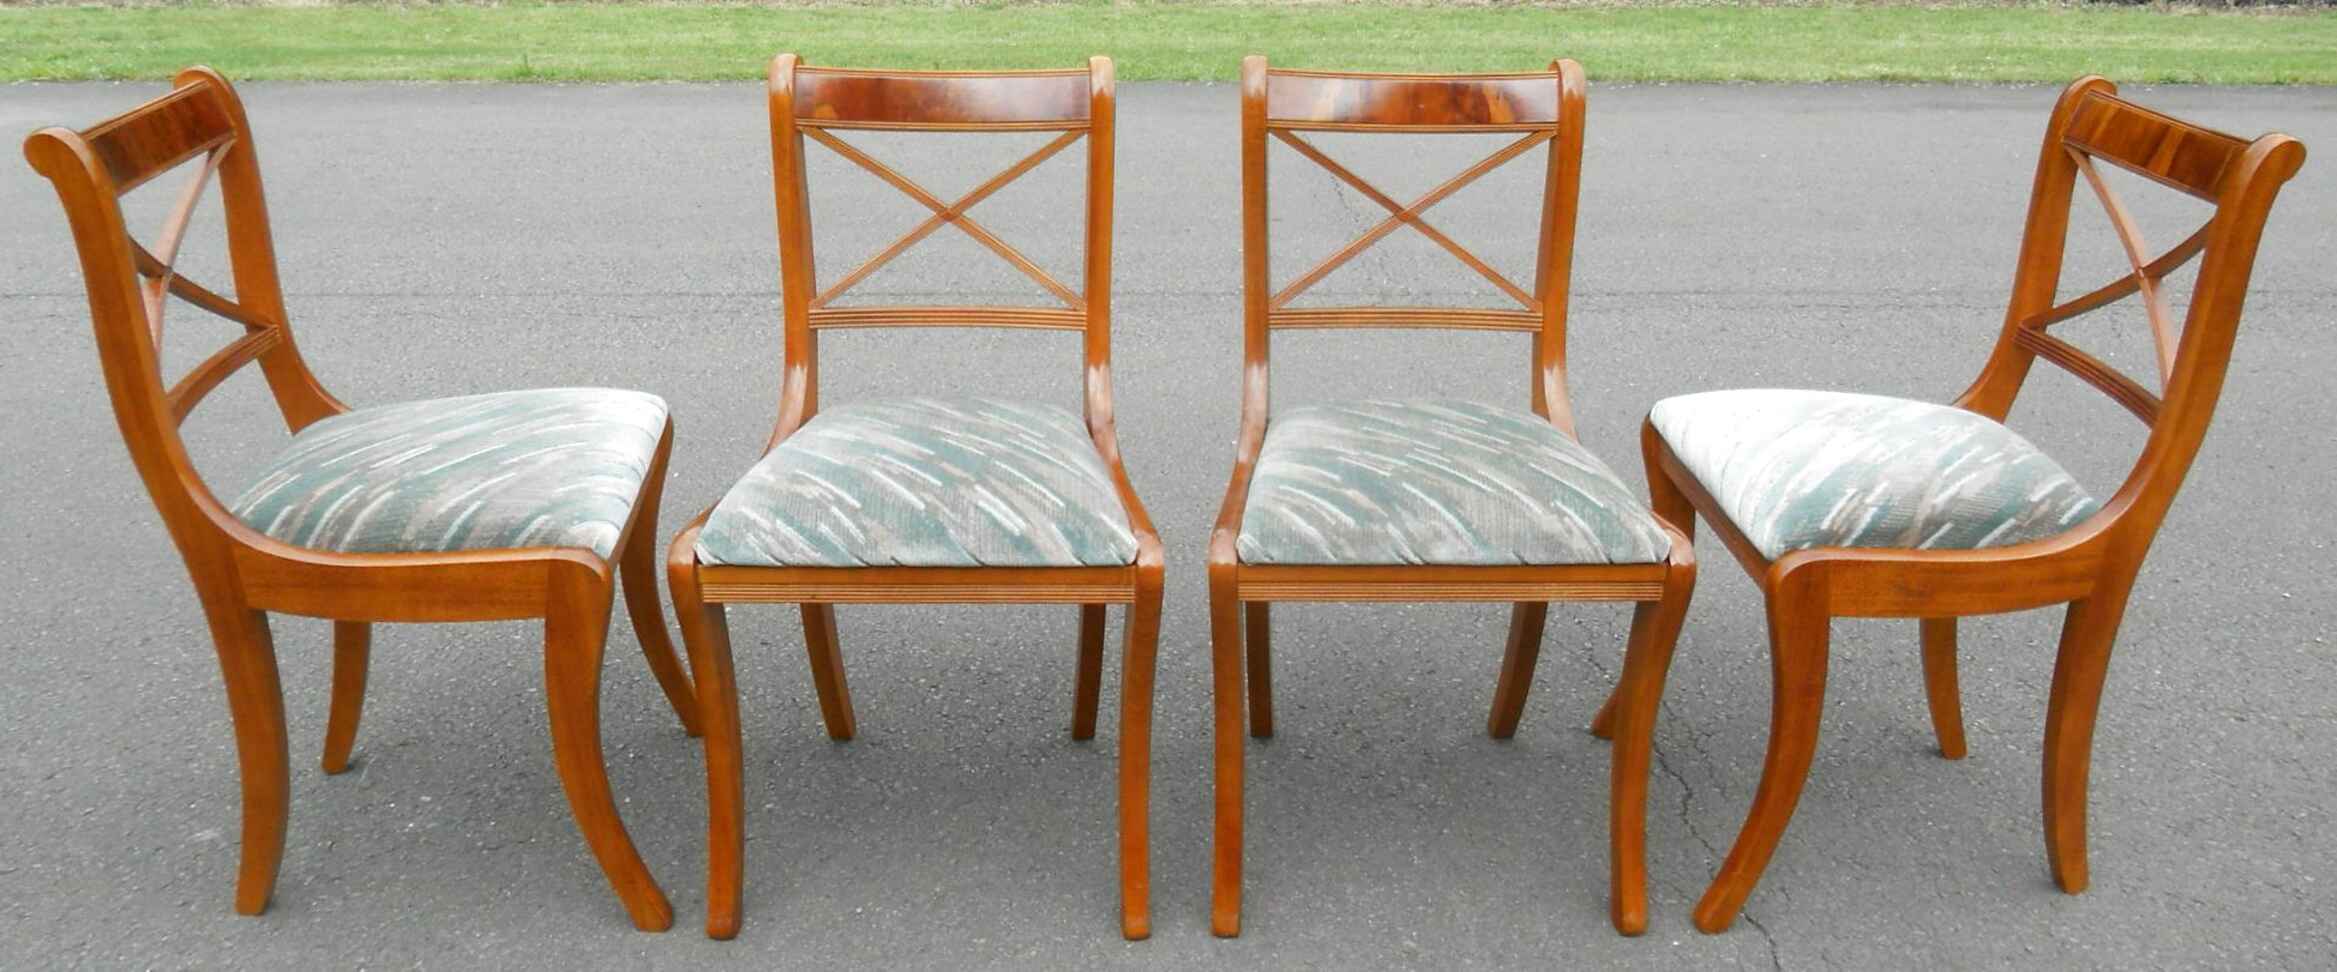 dining room chairs in yew